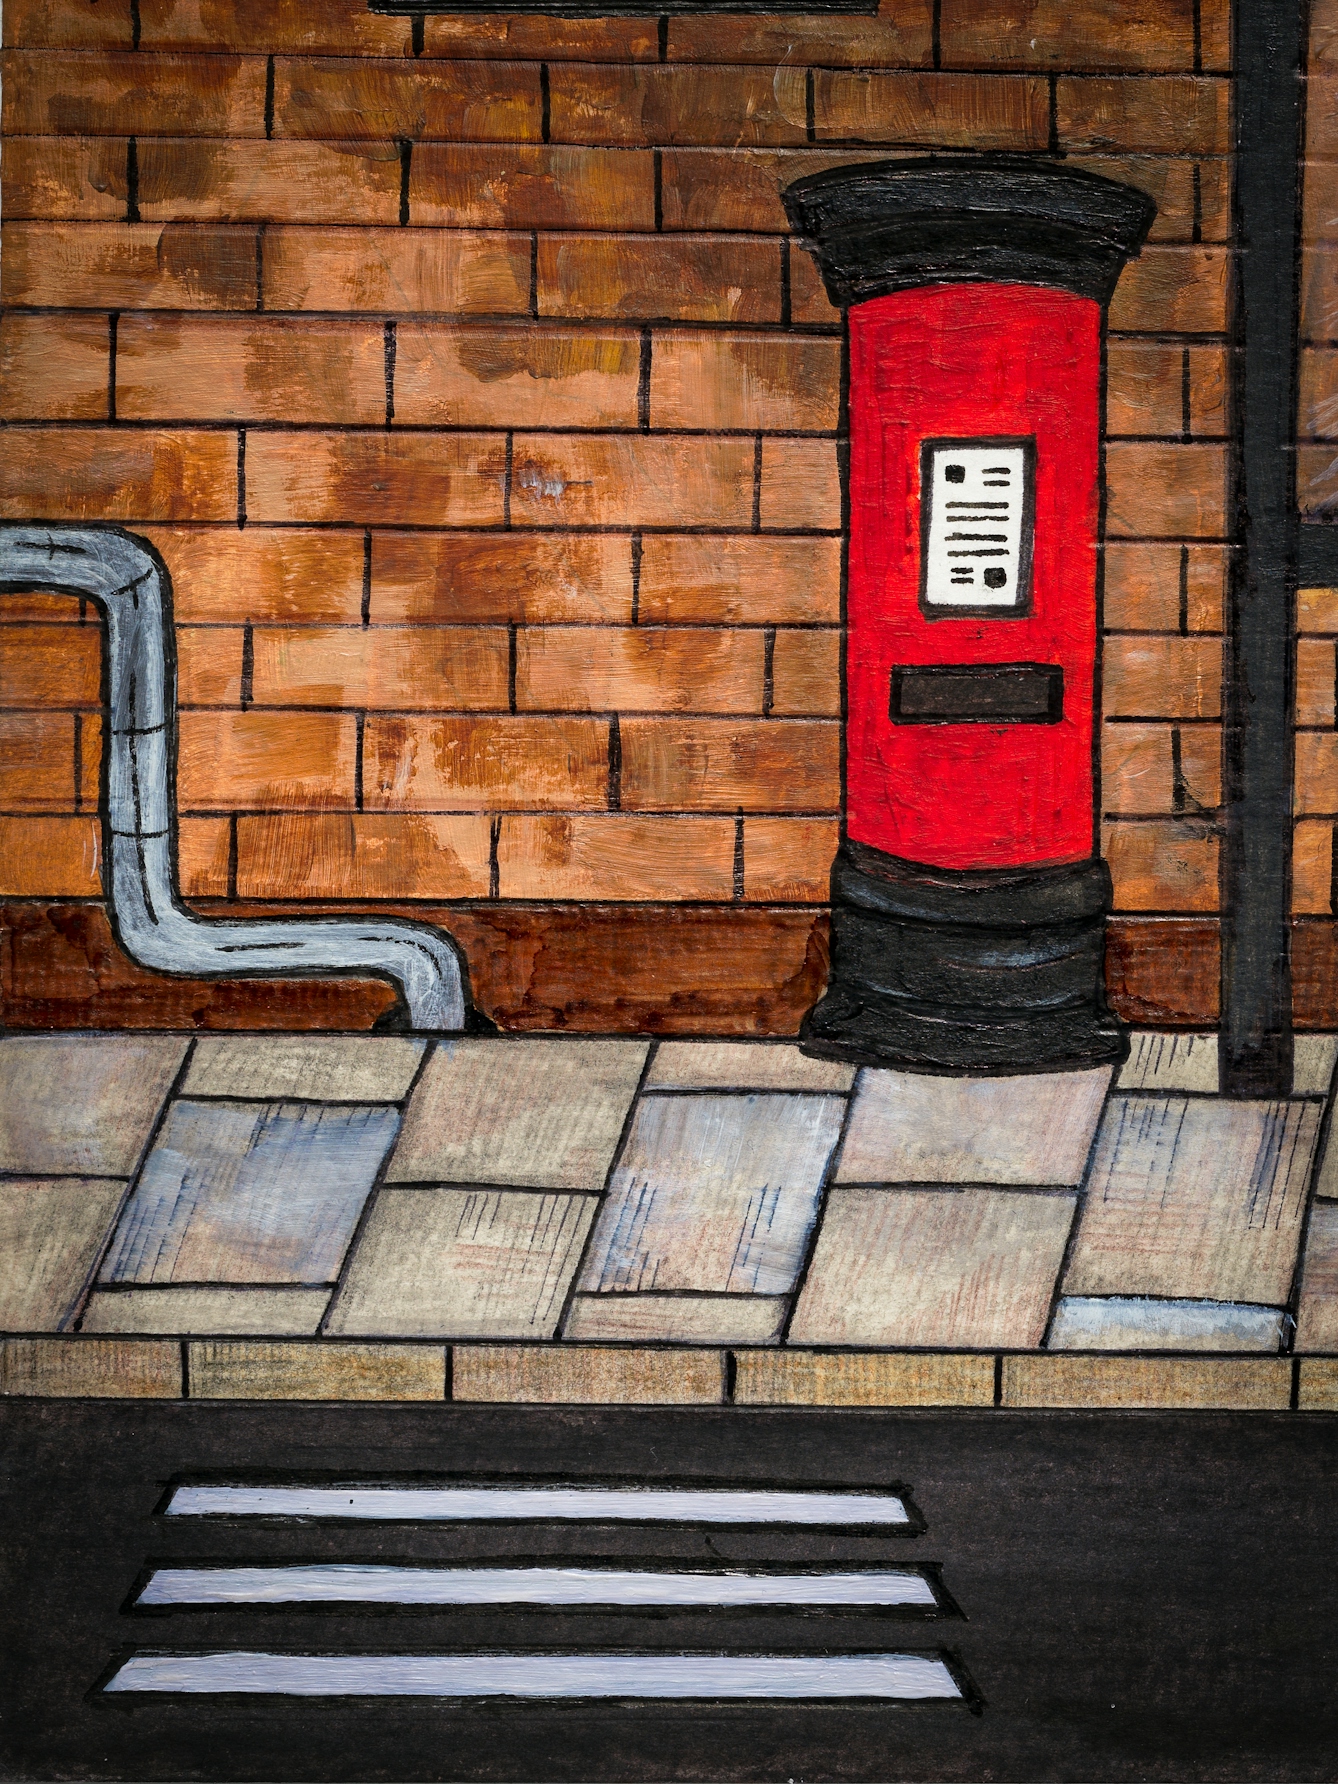 Detail from larger artwork made with paint and ink on textured watercolour paper. The artwork shows a street scene with a red post box and an industrial looking brick building.